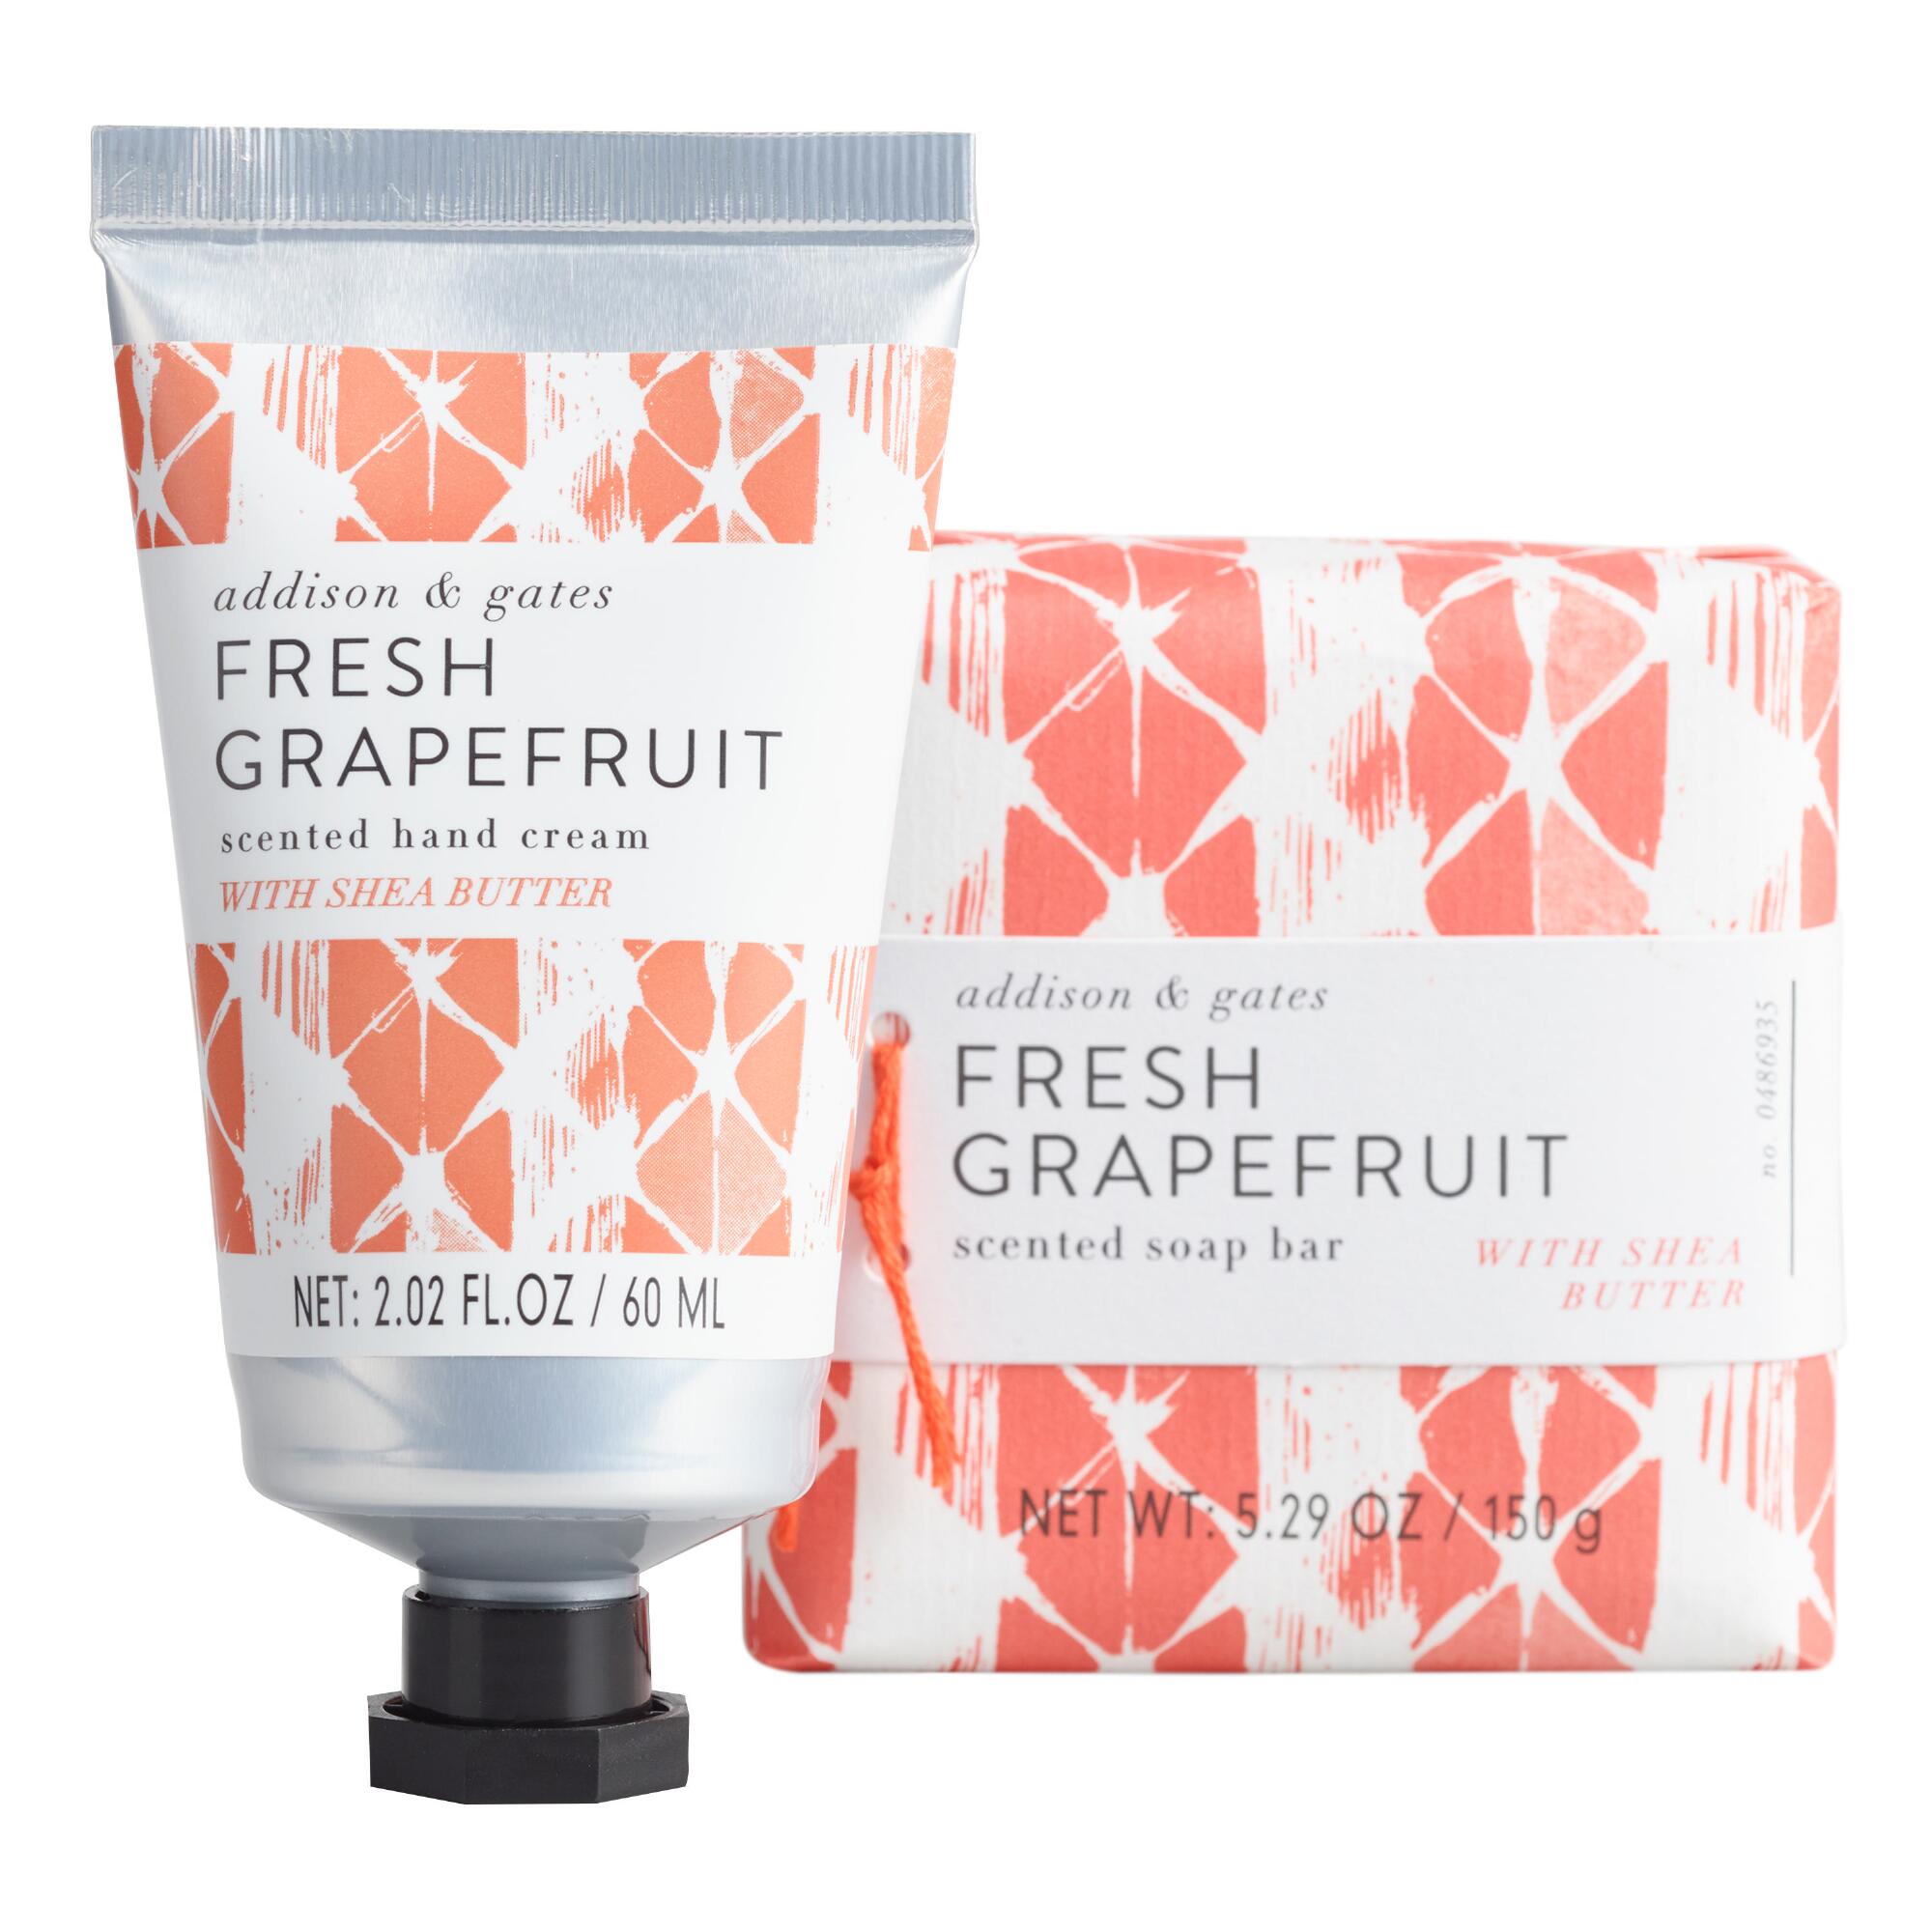 A&G Geo Pop Grapefruit Bath and Body Collection by World Market